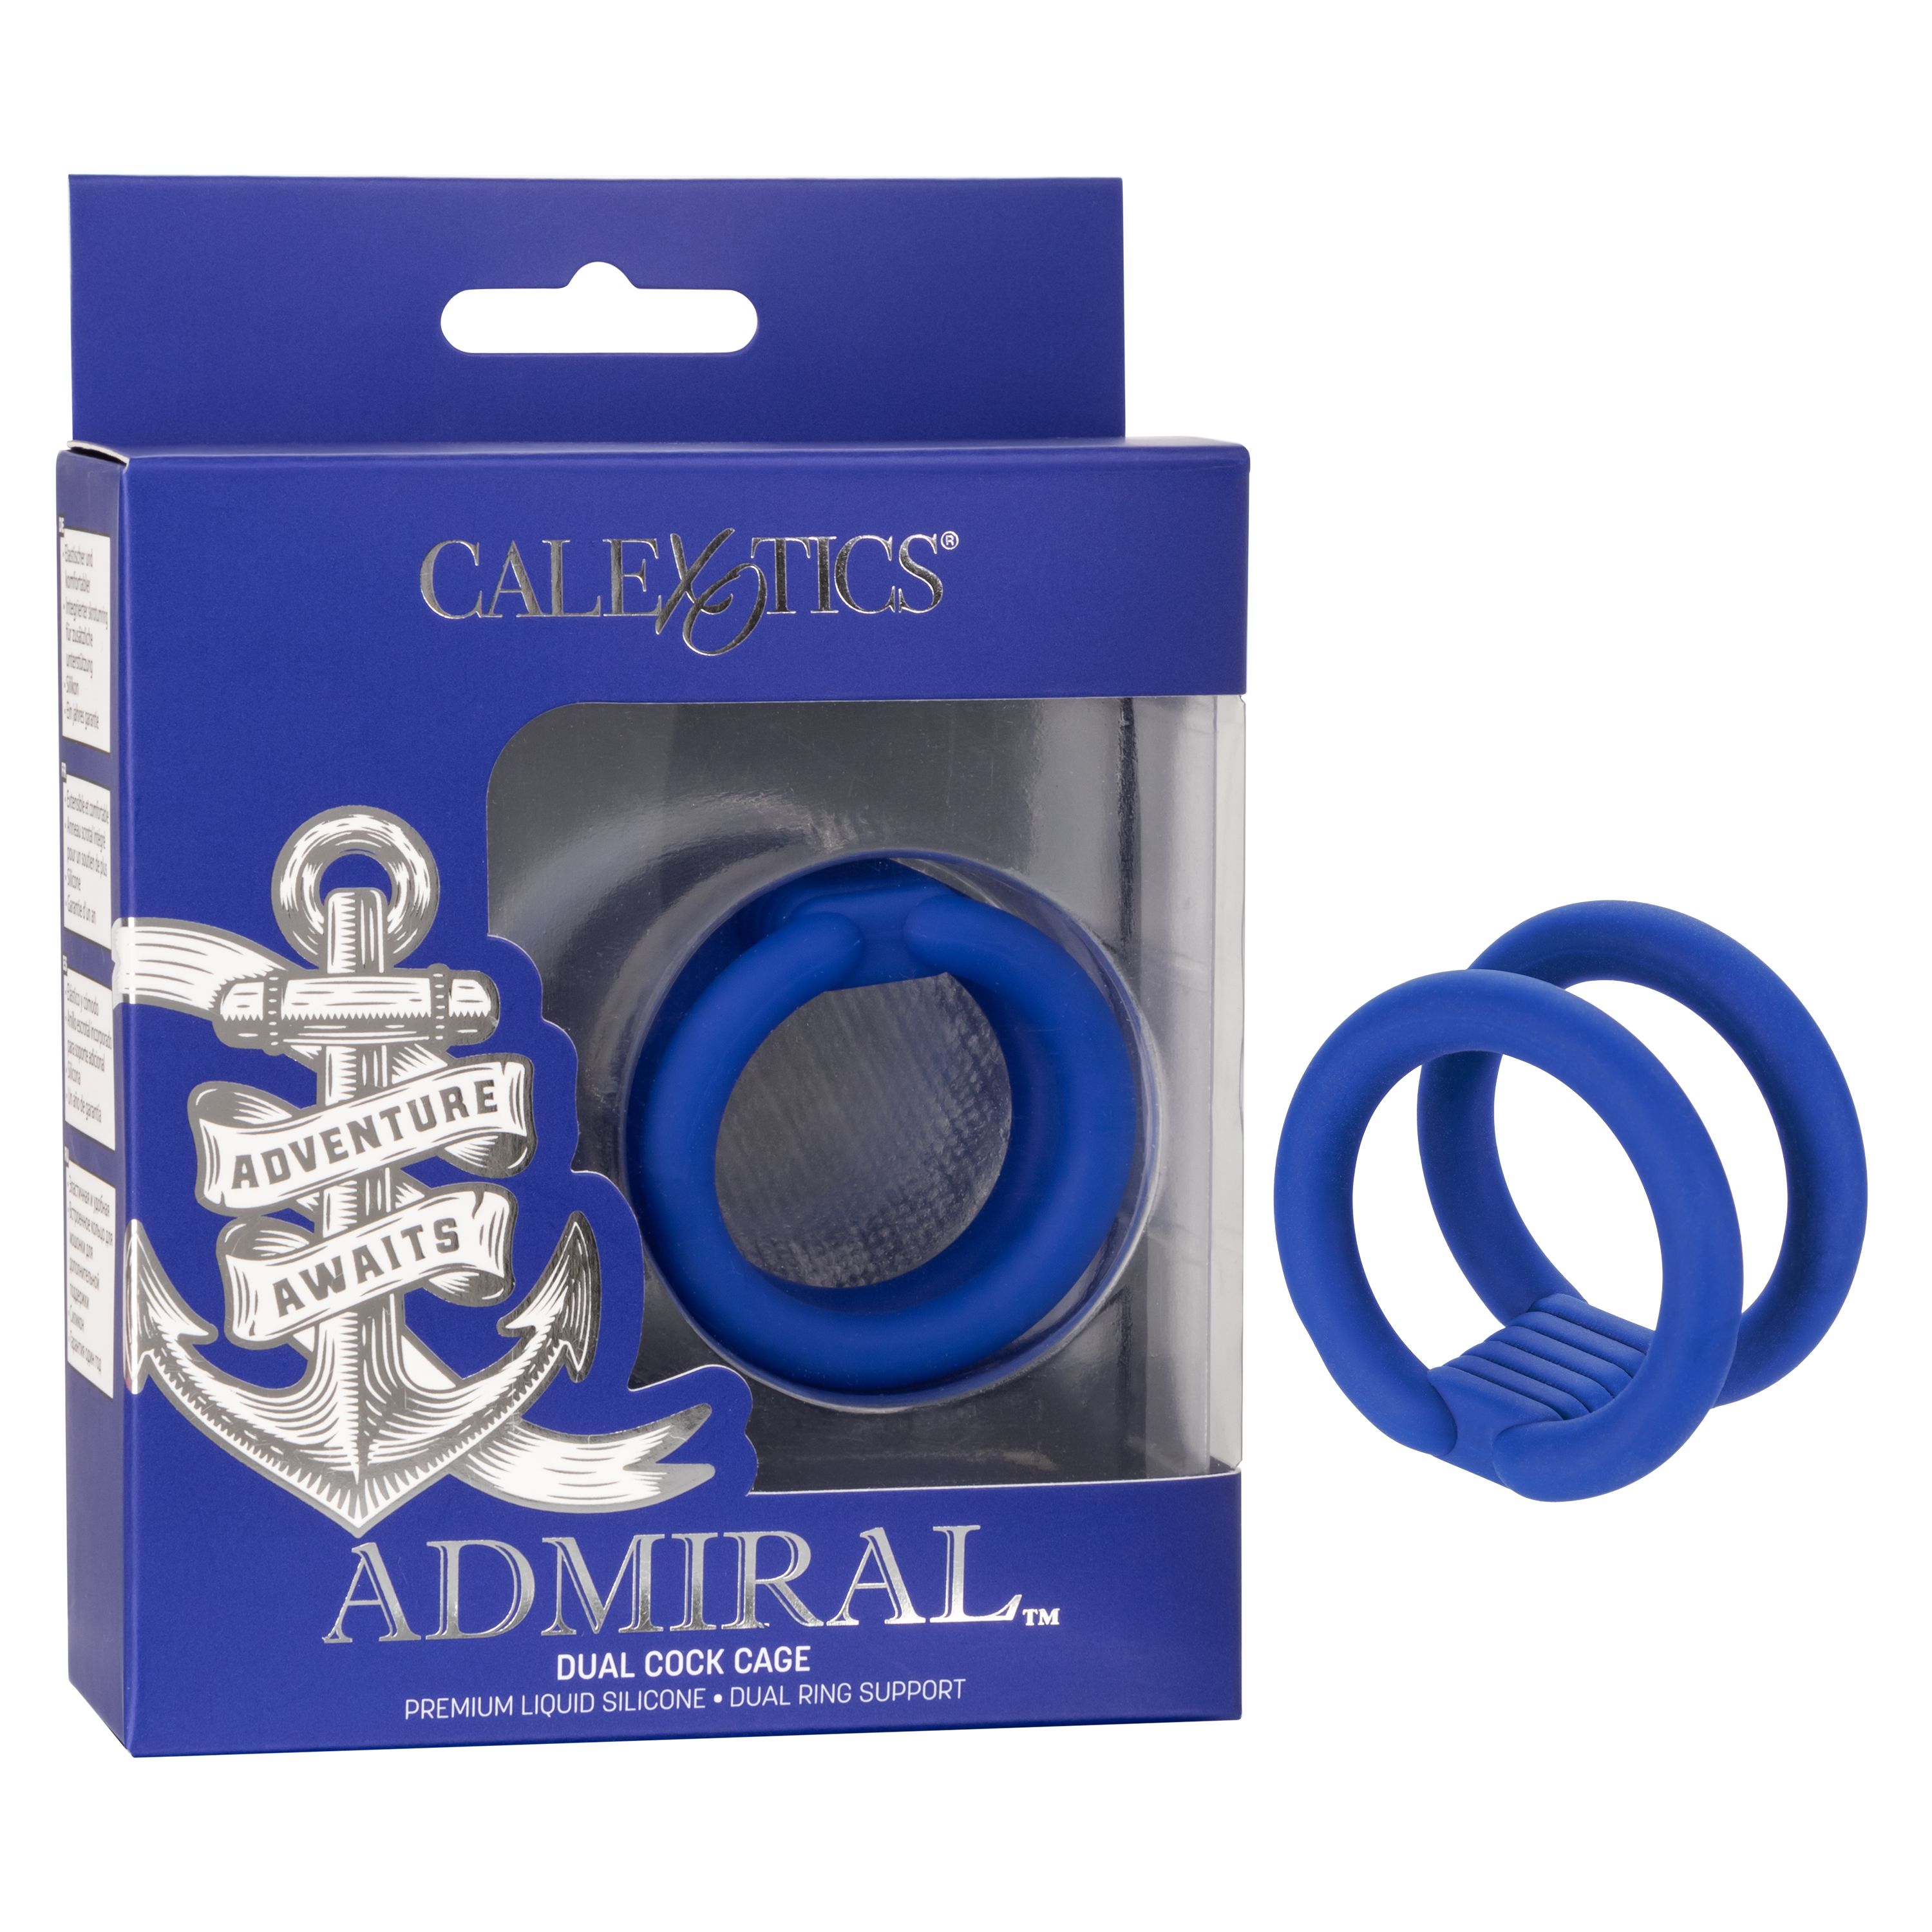 ADMIRAL DUAL COCK CAGE - Click Image to Close